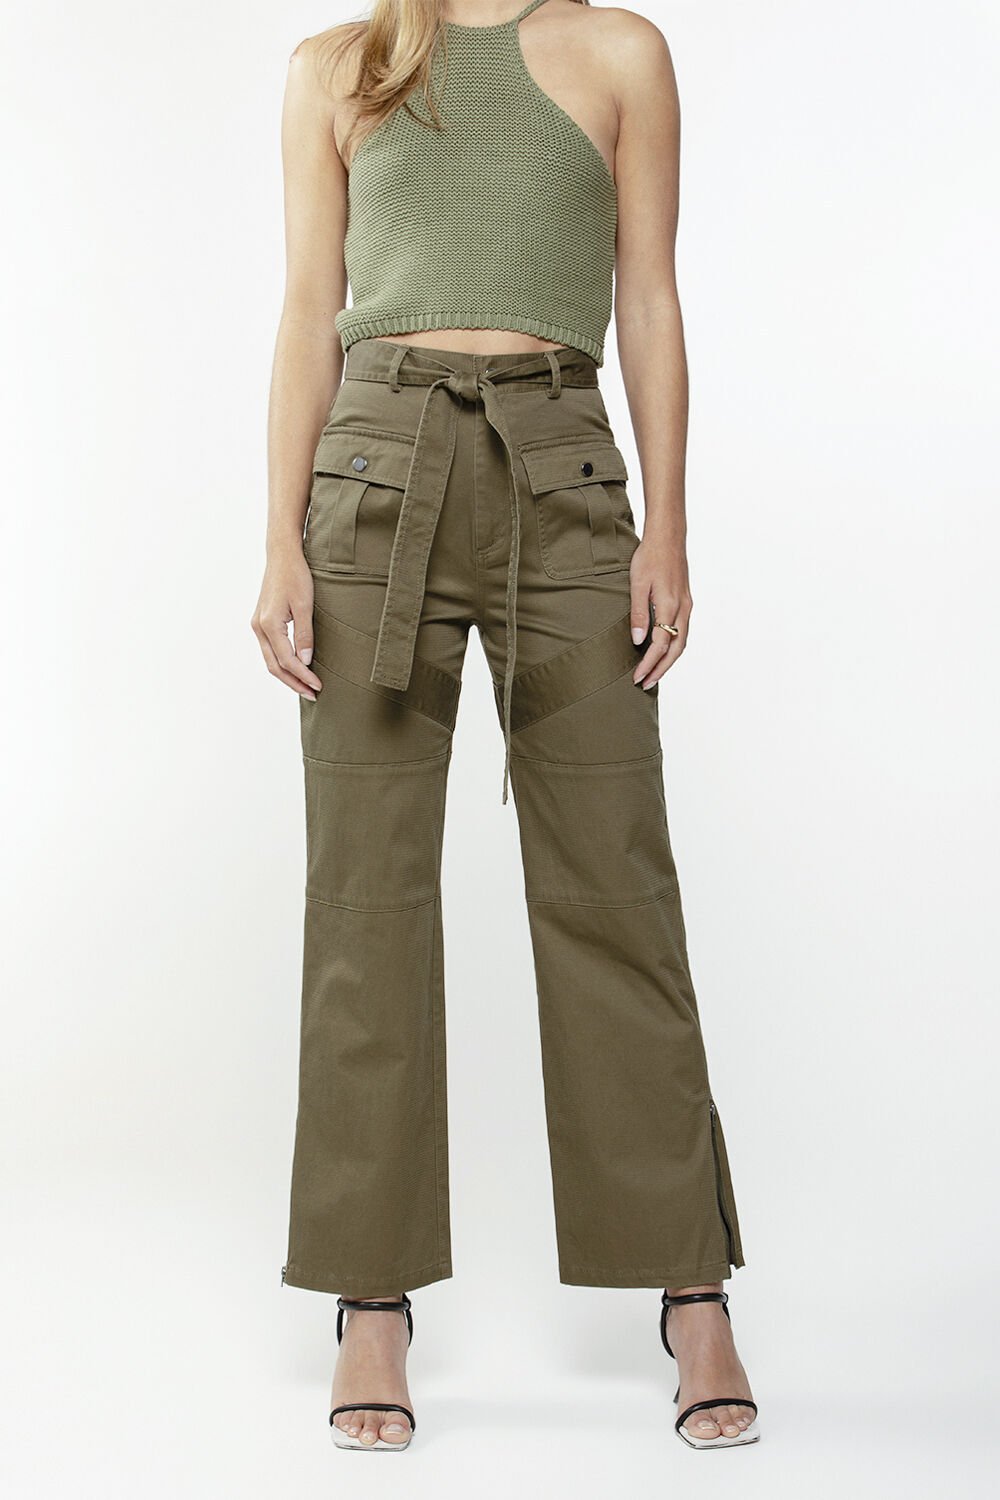 UTILITY SEAM DETAIL PANT in colour IVY GREEN